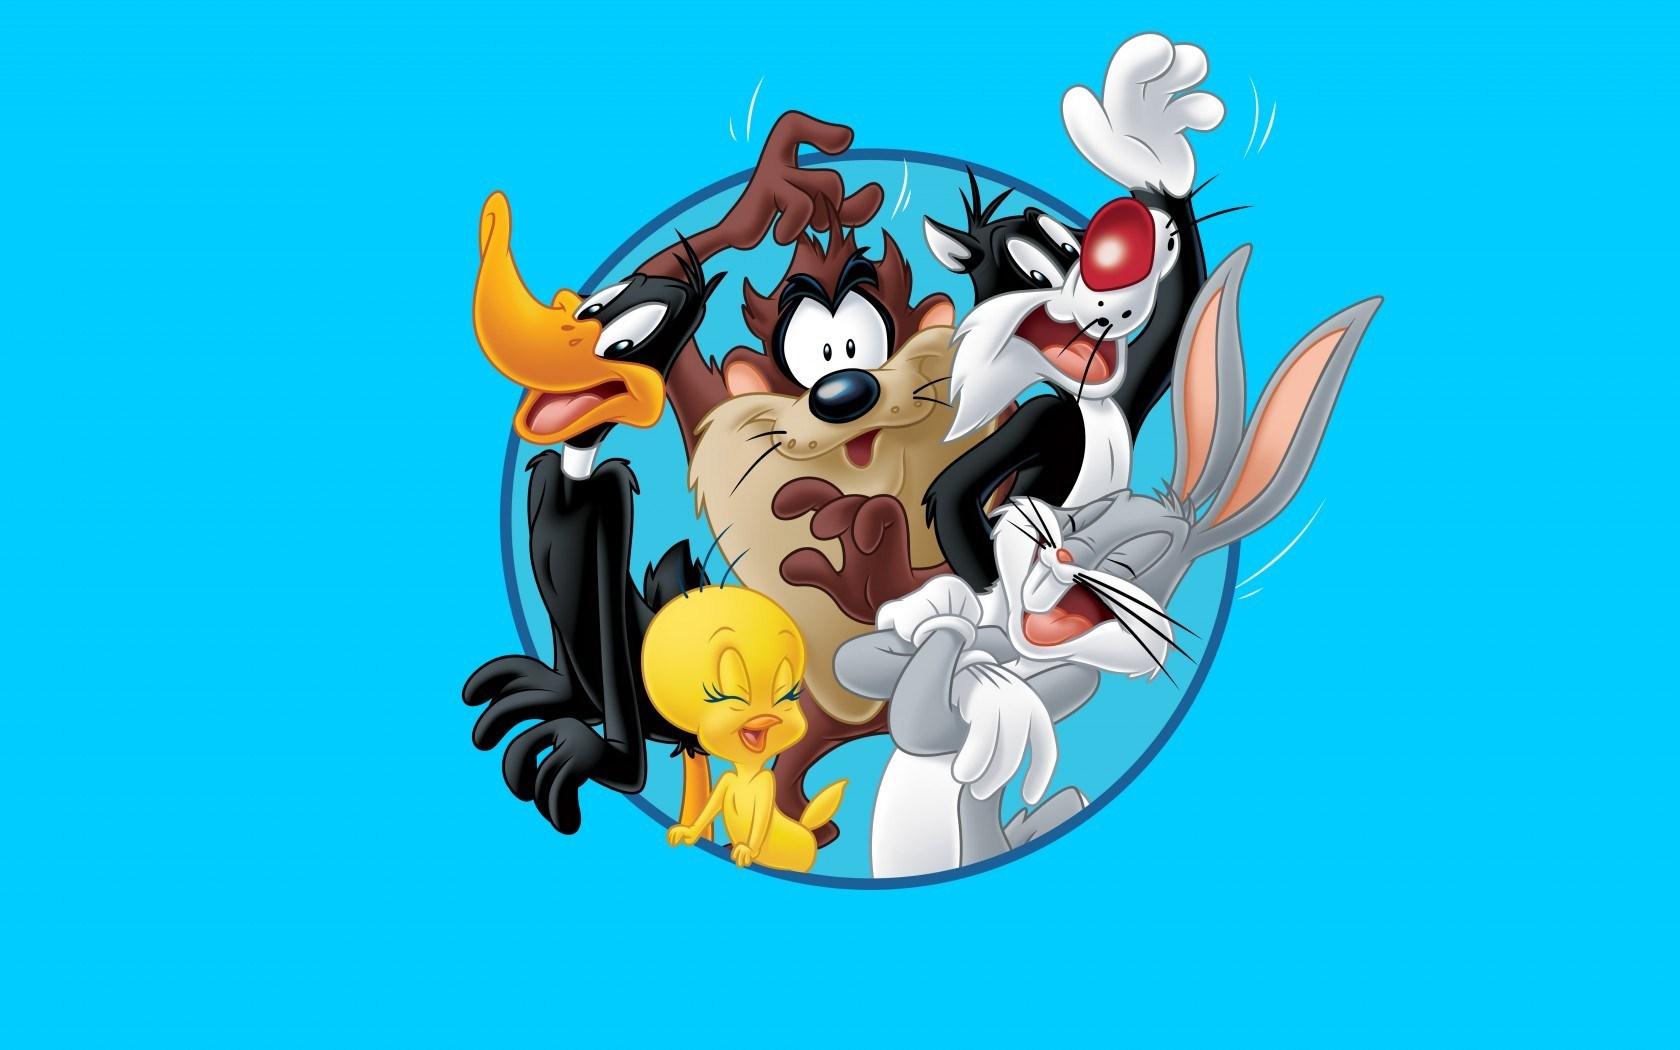 Free Download Colorful Image, 28 Bugs Bunny Quality HD